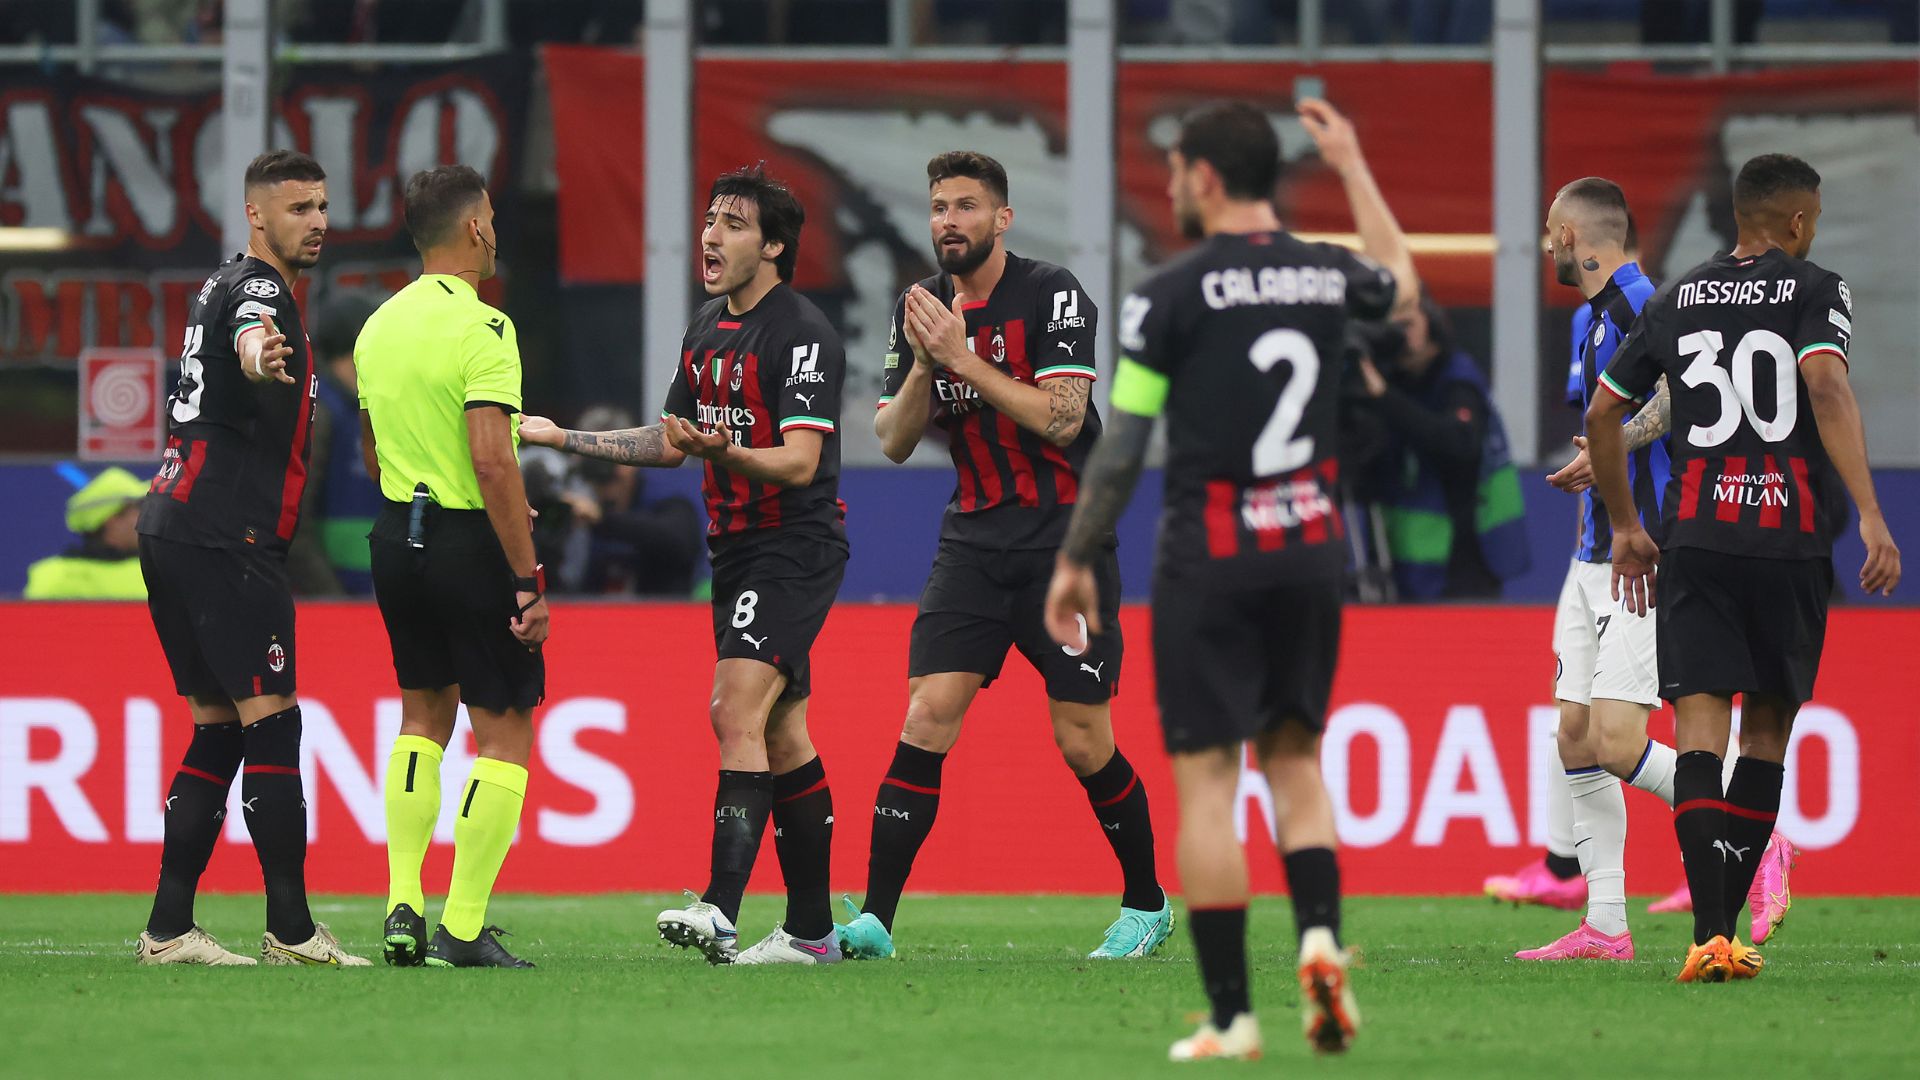 Milan players complain about bid with refereeing 